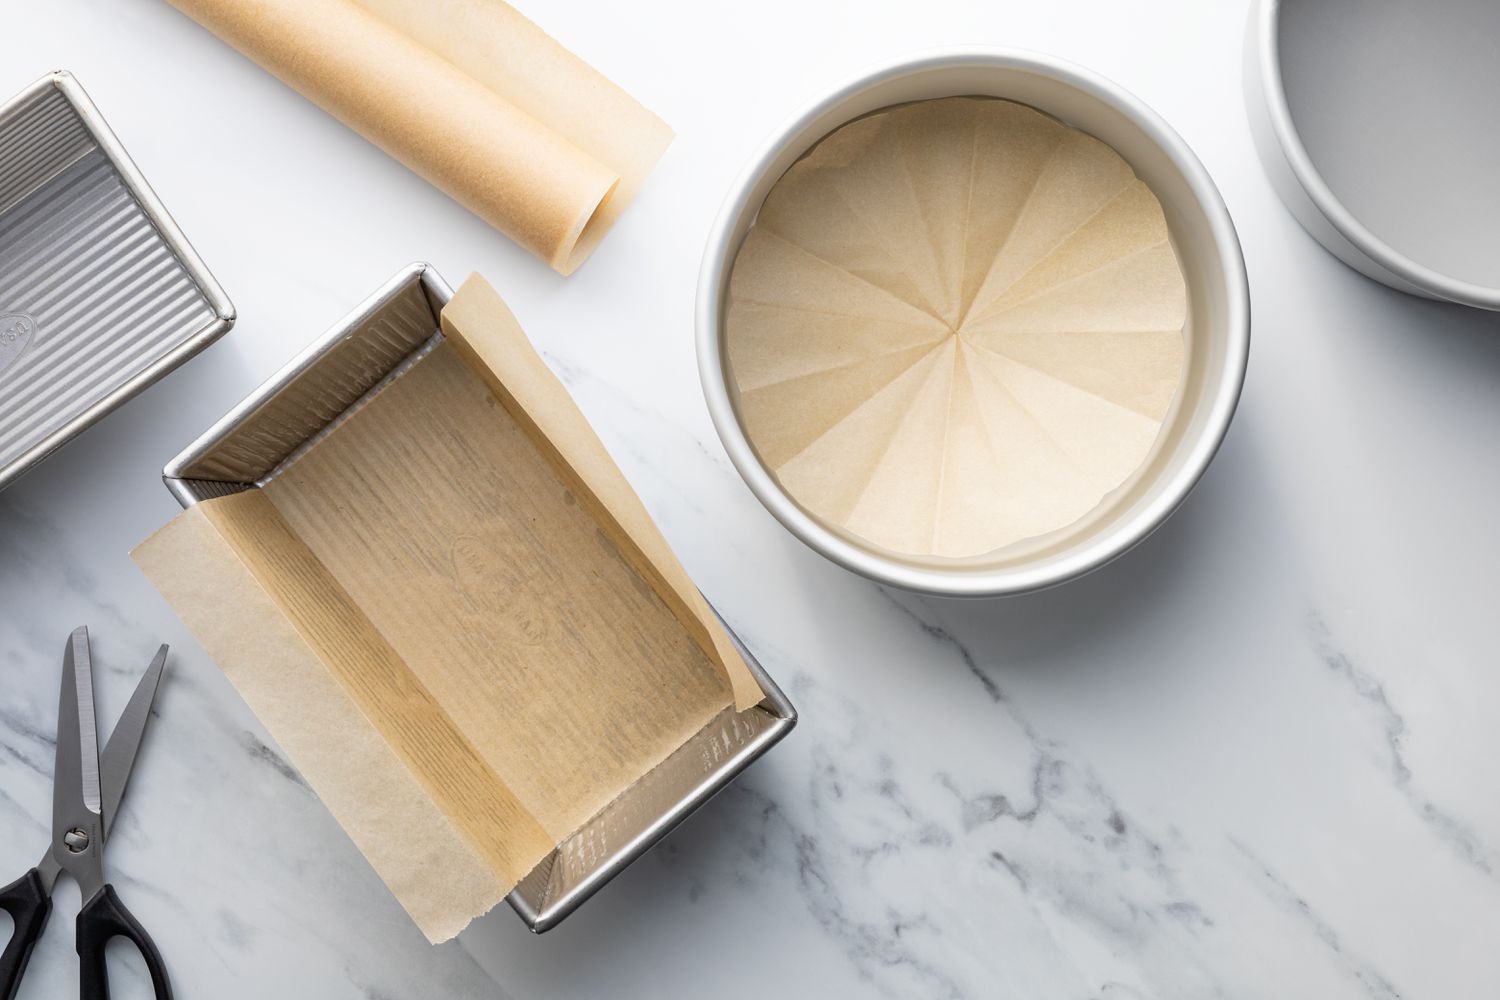 1 Line Cake Pan With Parchment